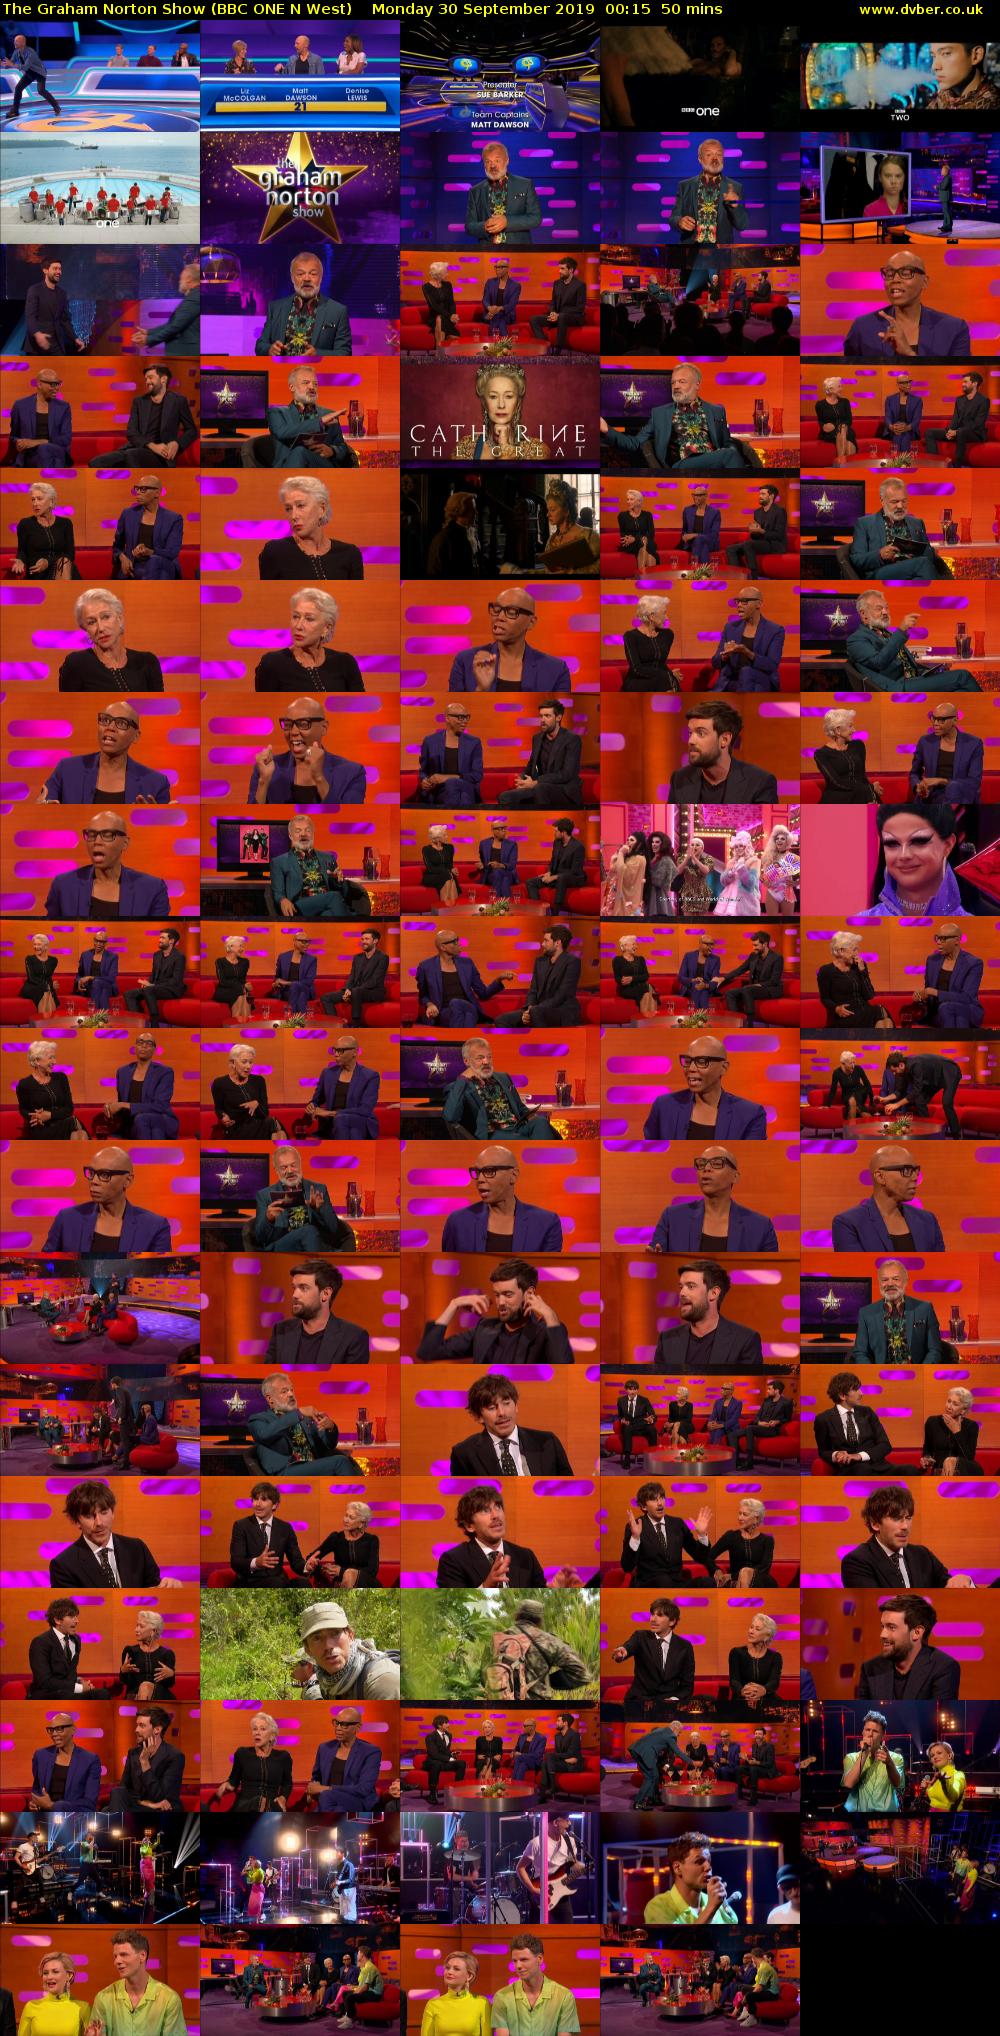 The Graham Norton Show (BBC ONE N West) Monday 30 September 2019 00:15 - 01:05